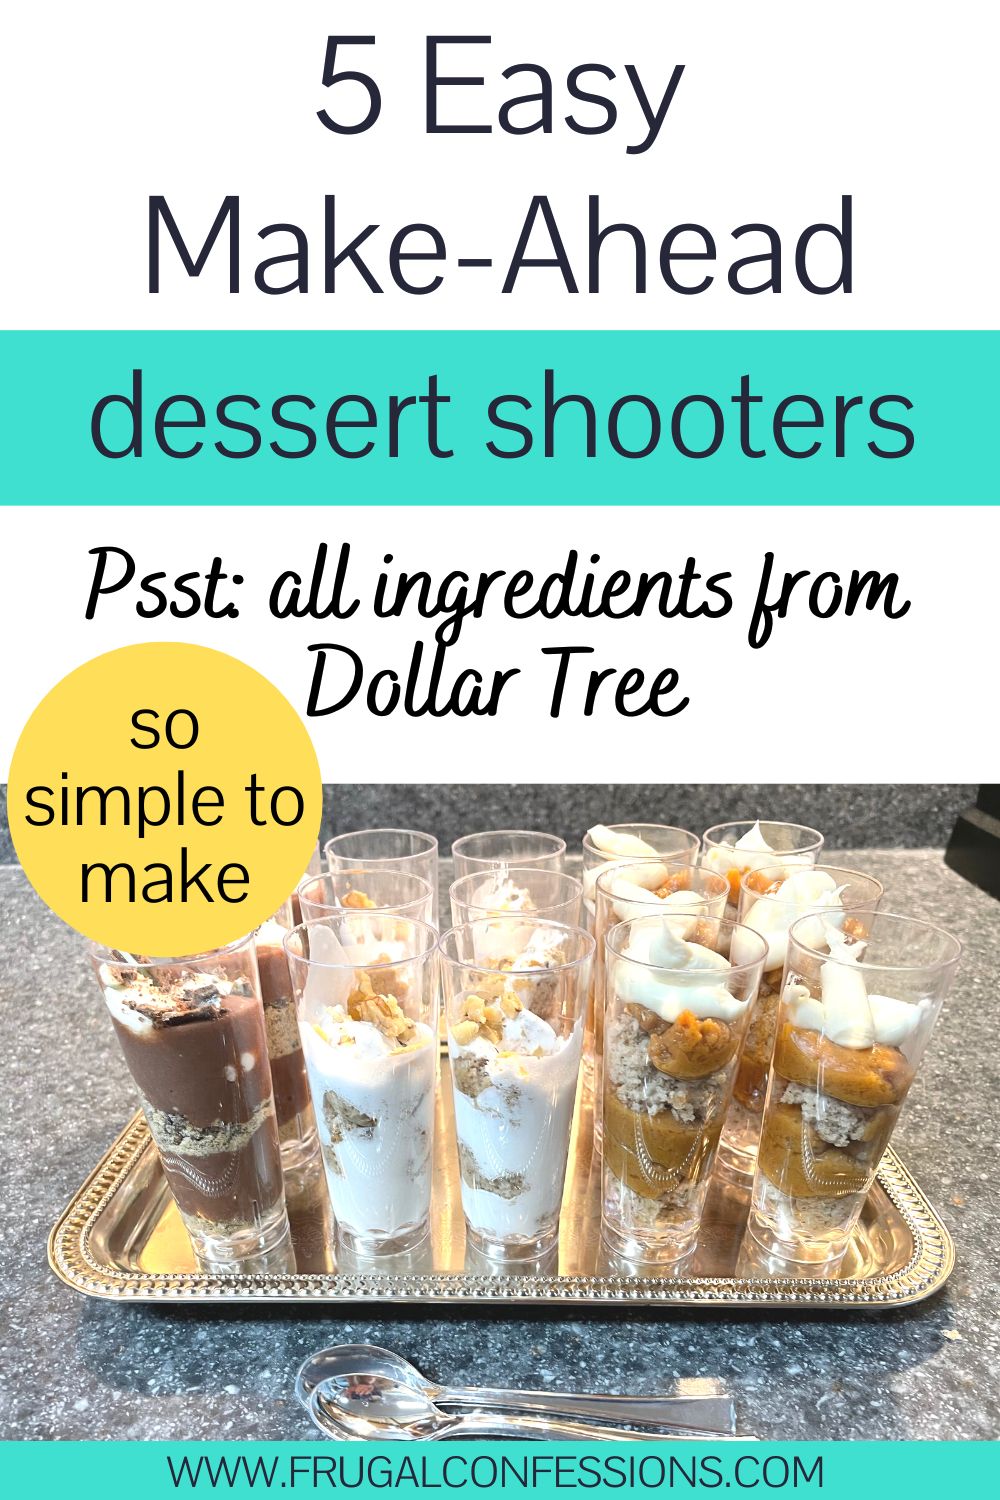 silver tray full of yummy dessert shooters on kitchen counter, text overlay 